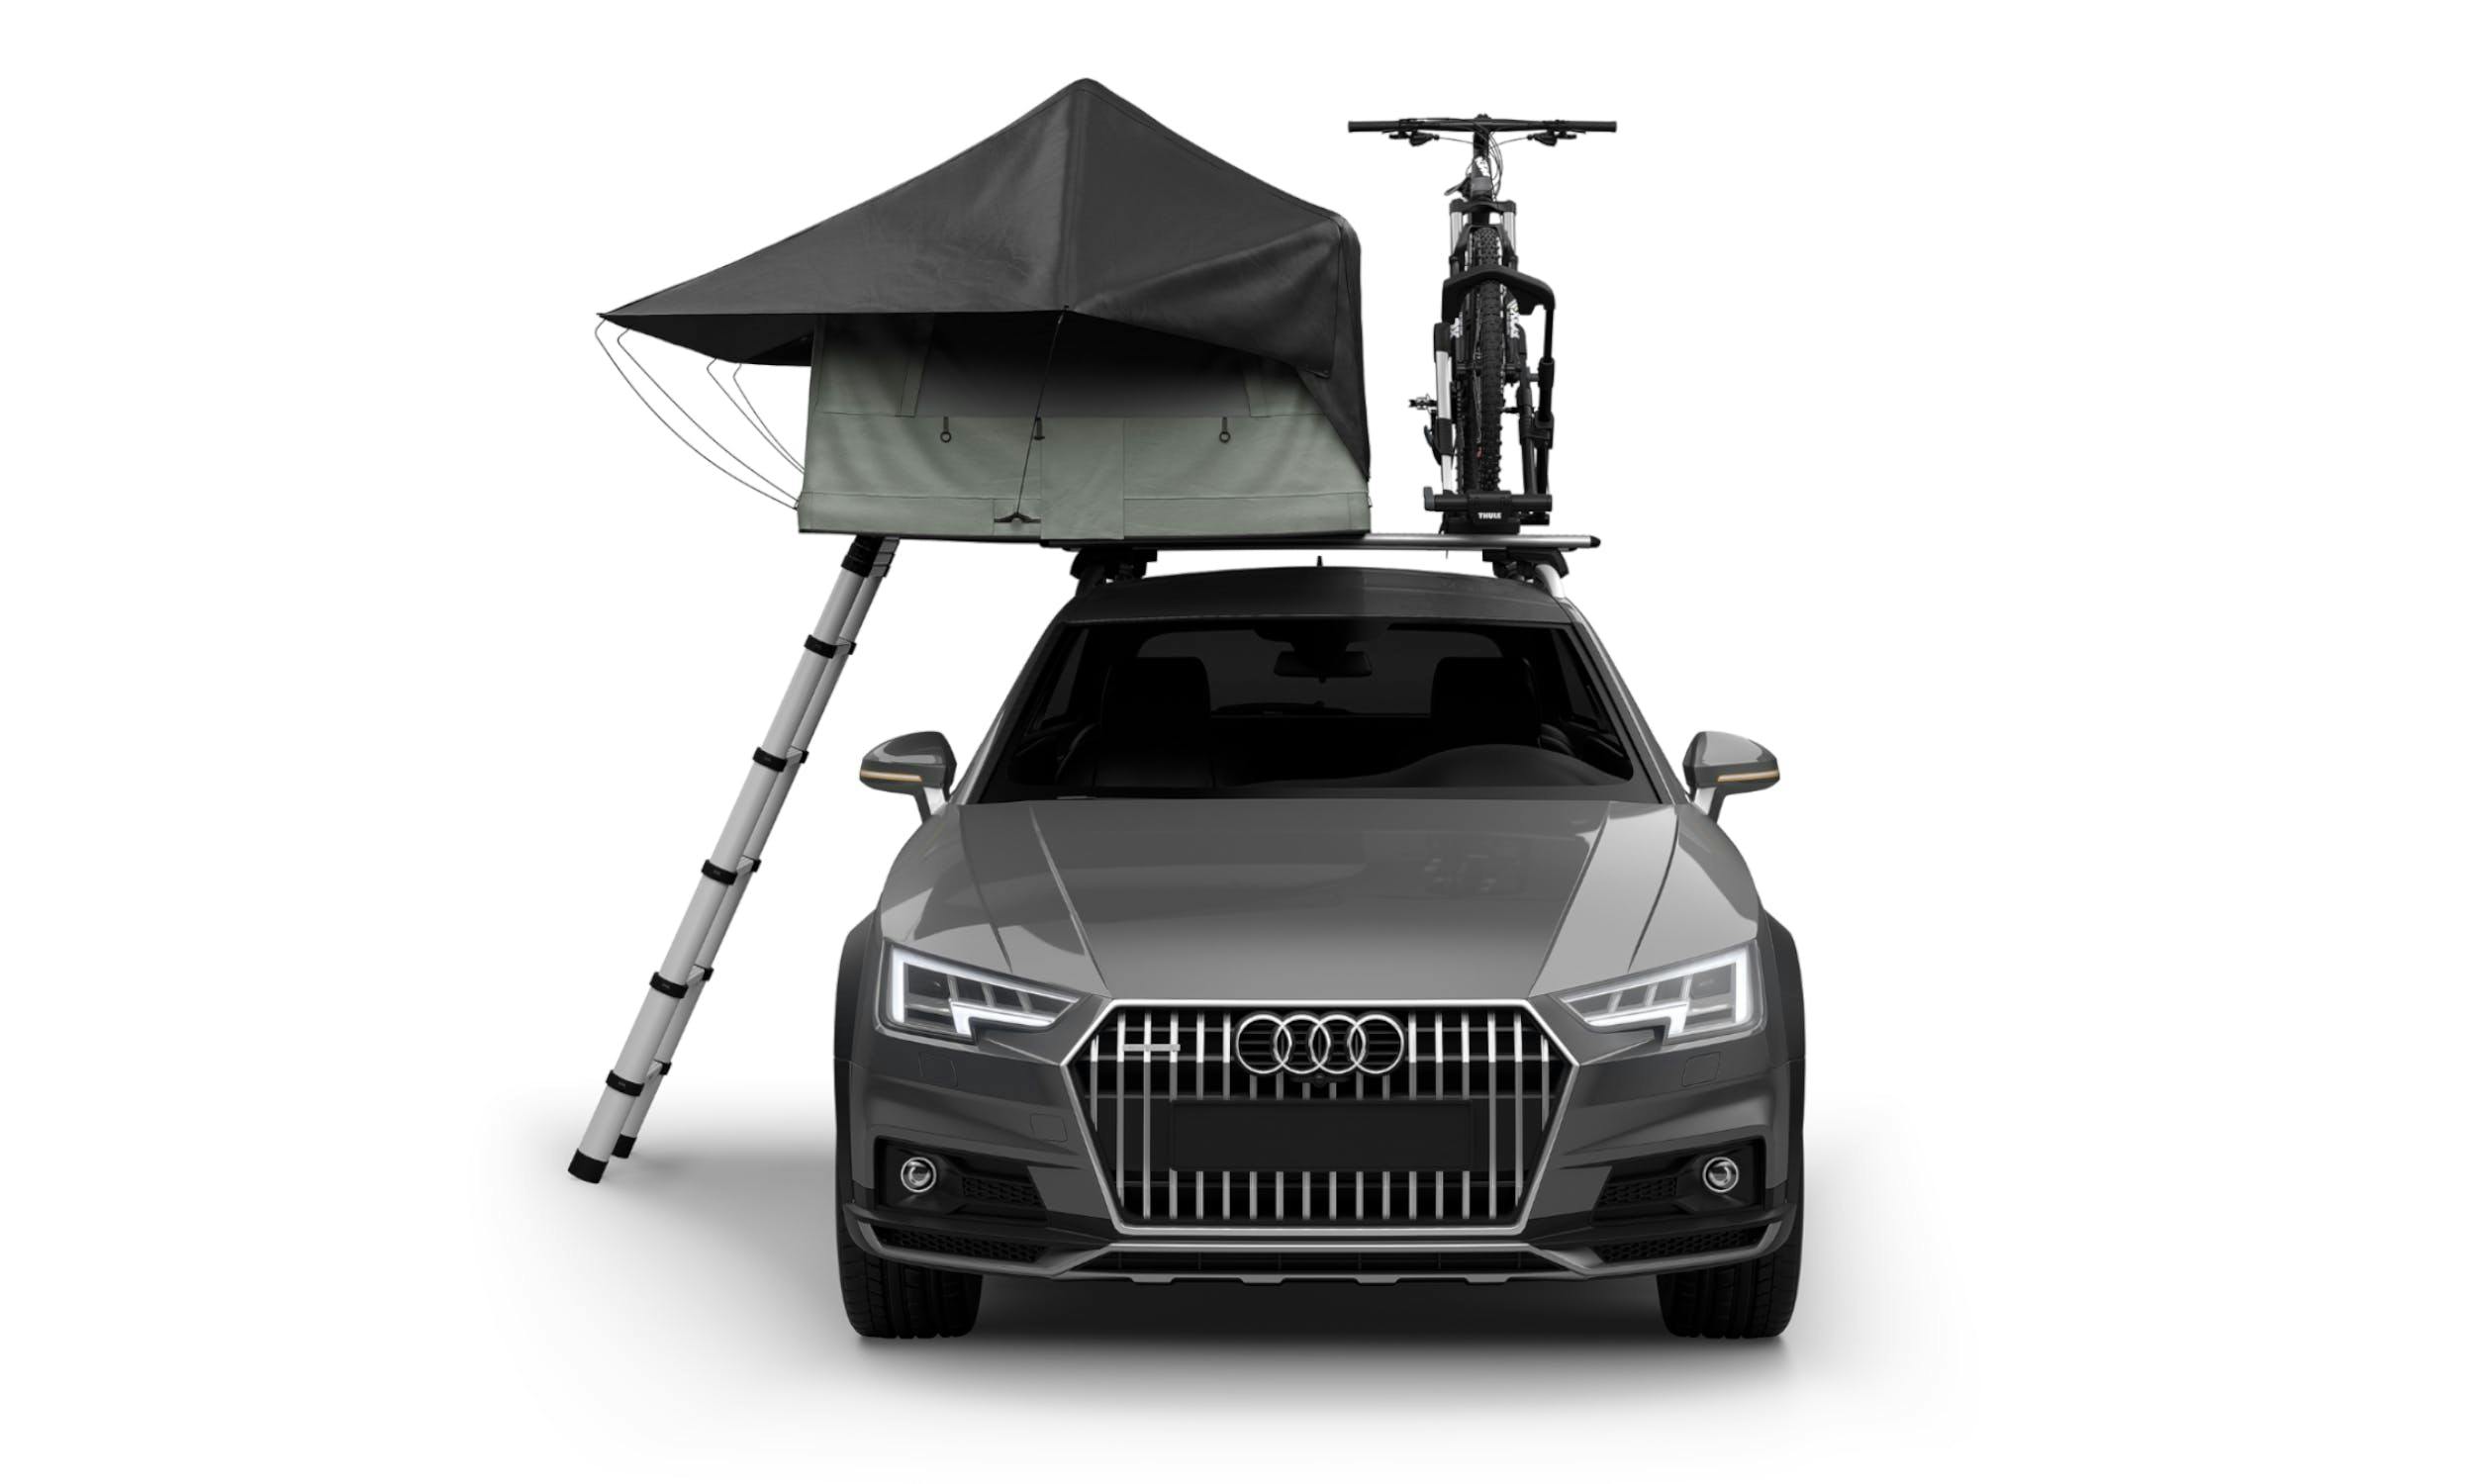 Thule Foothill tent shown set up on the top of a car, with a bike also on the roof rack